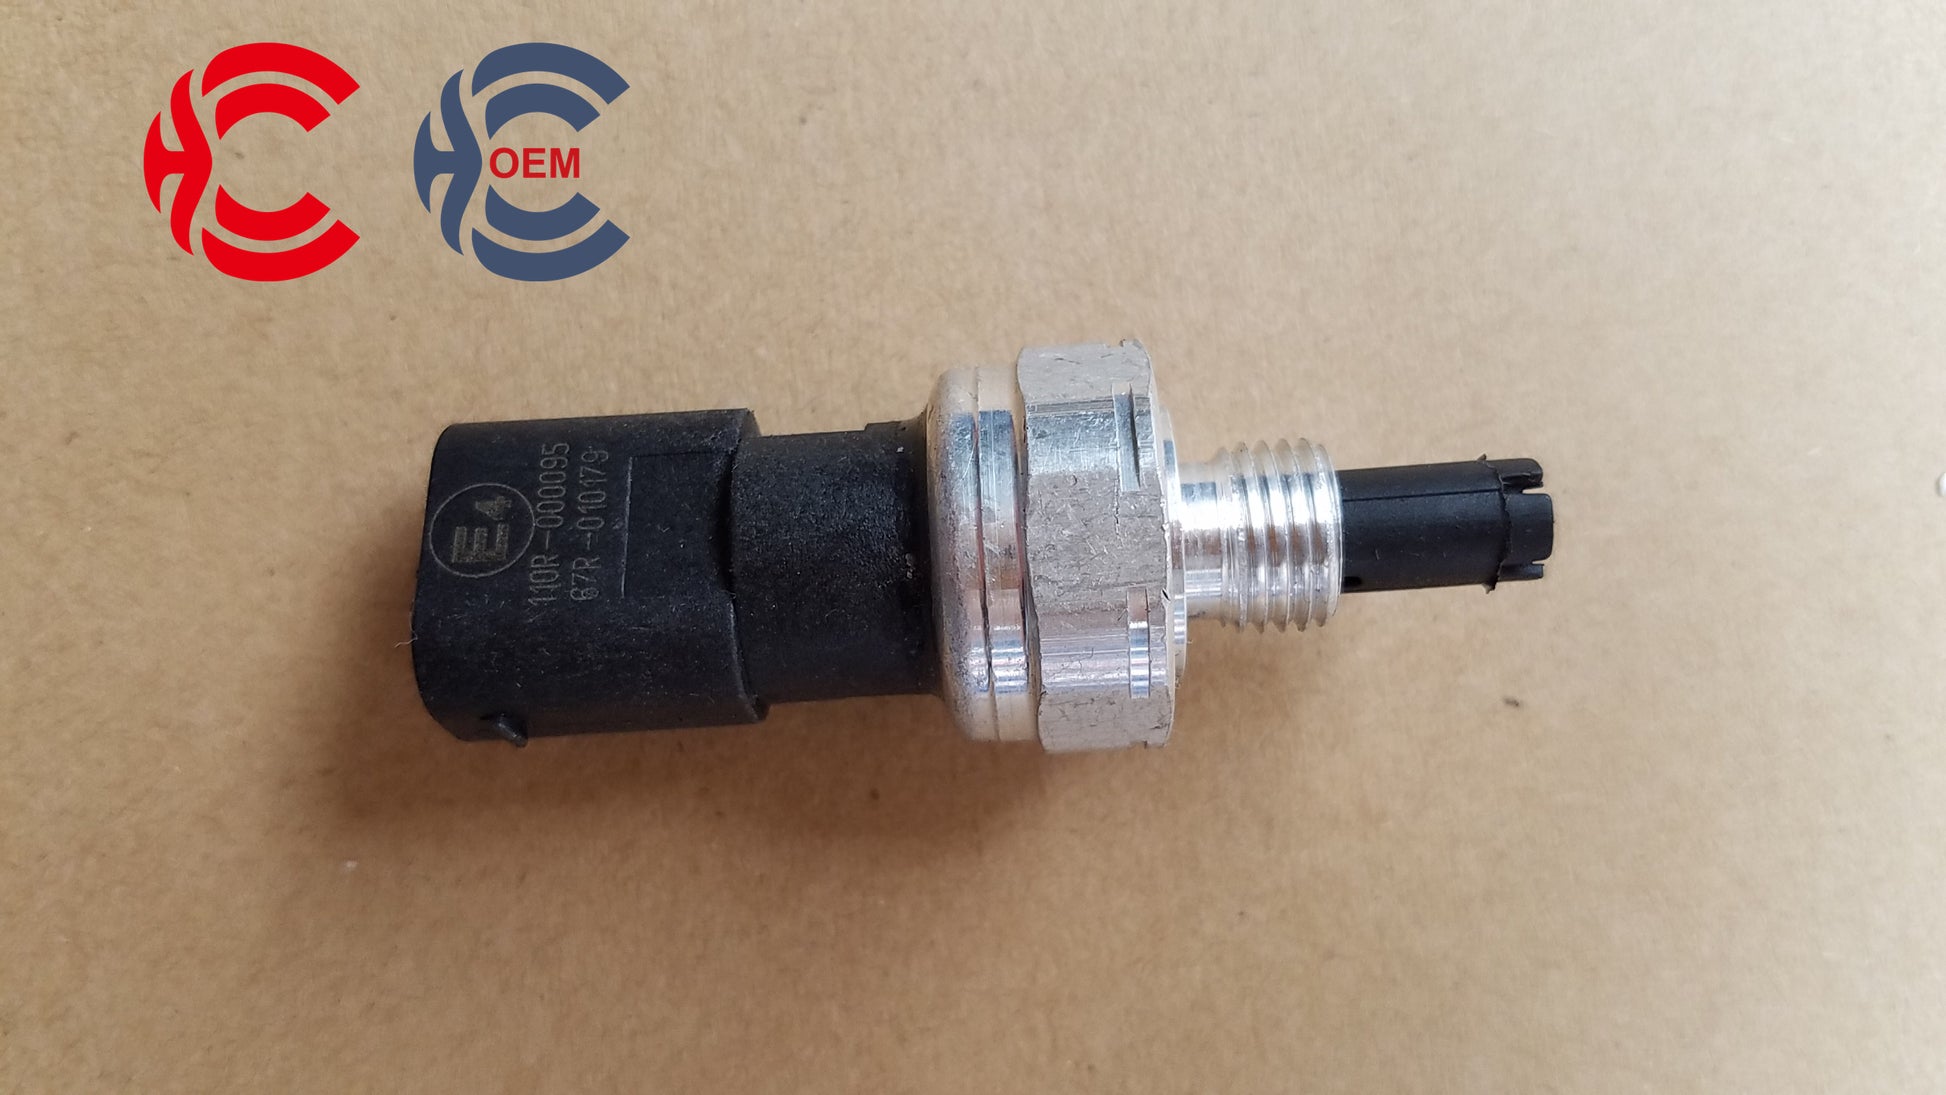 OEM: 110R-000095 67R-010179 51CP26-01 MKB00-38231J0Material: ABS metalColor: black silverOrigin: Made in ChinaWeight: 100gPacking List: 1* Fuel Pressure Sensor More ServiceWe can provide OEM Manufacturing serviceWe can Be your one-step solution for Auto PartsWe can provide technical scheme for you Feel Free to Contact Us, We will get back to you as soon as possible.